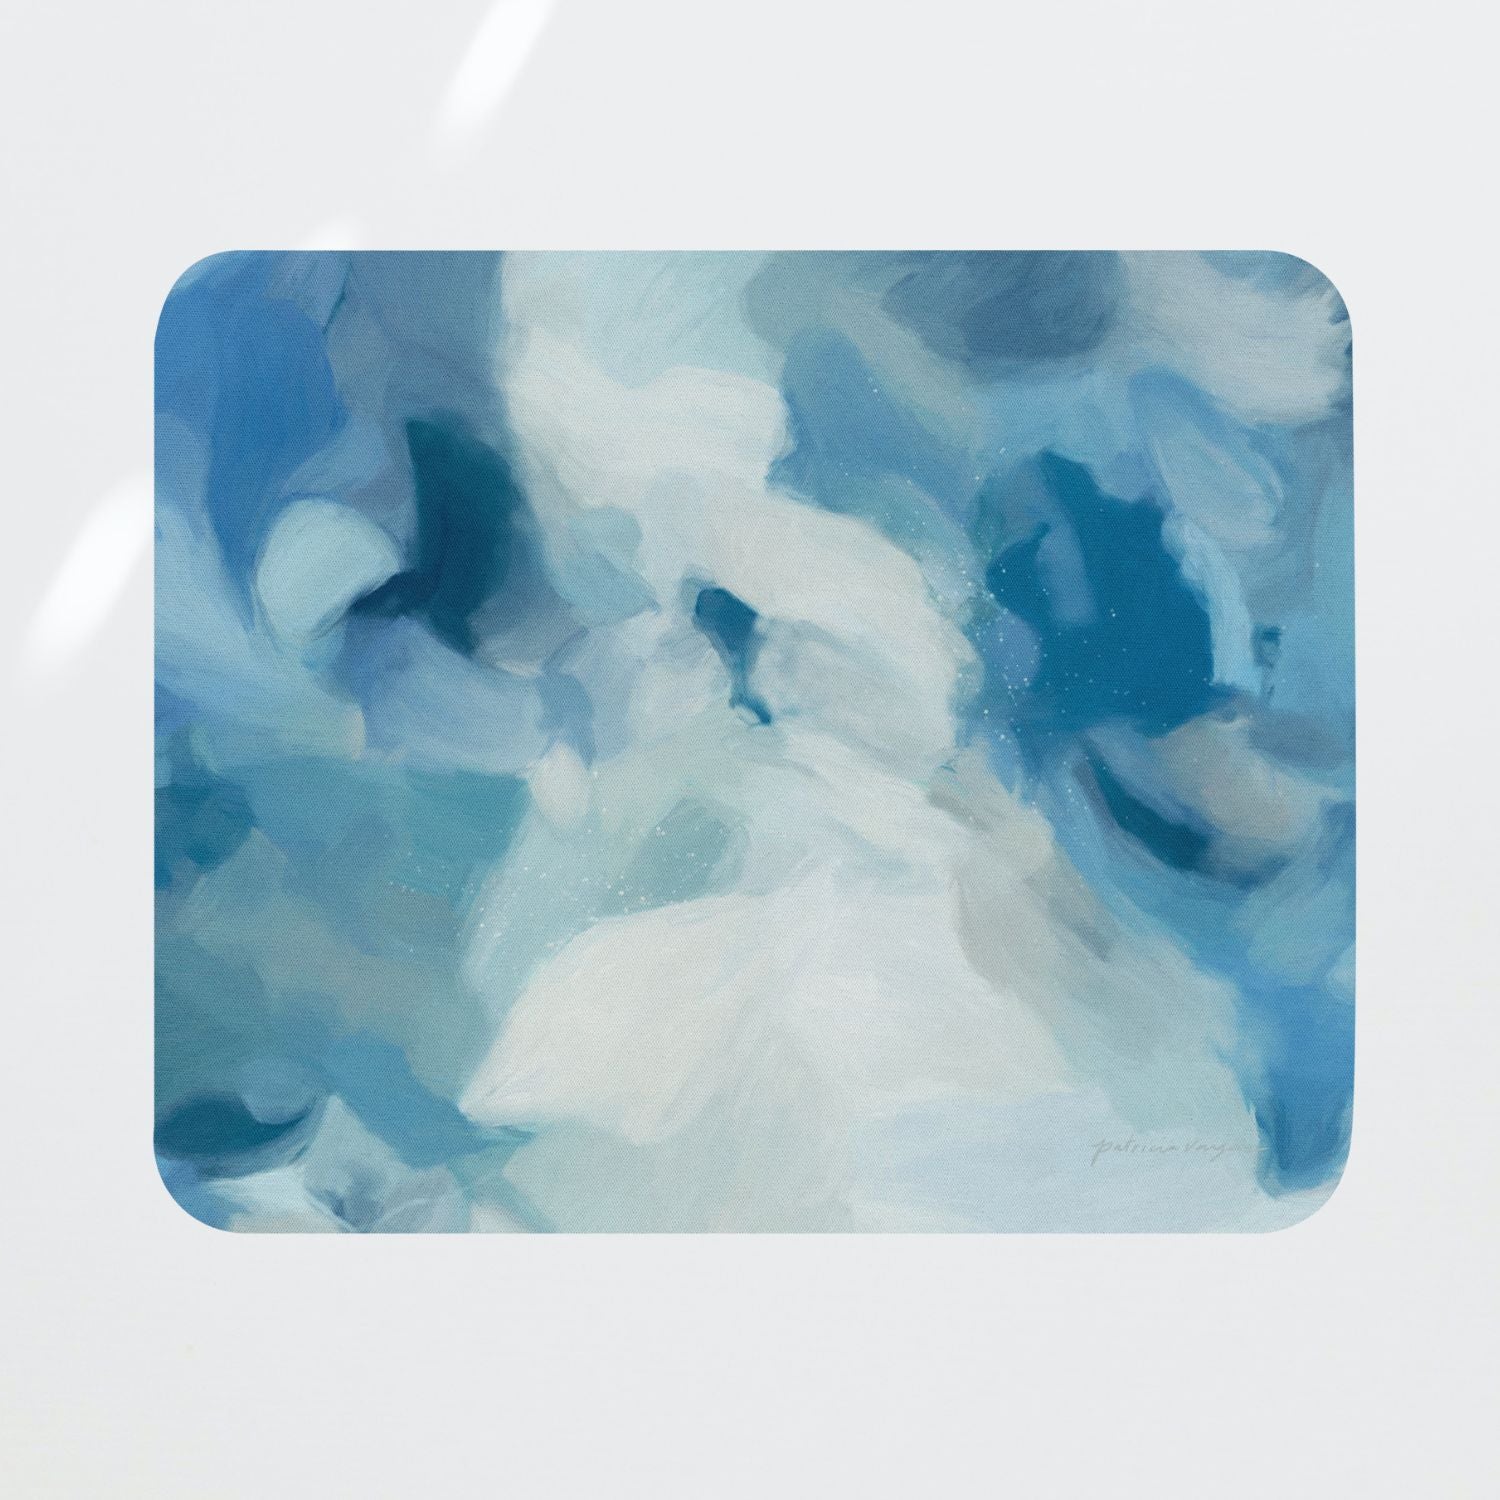 Liviana, colorful mouse pad for styling your office desk. Featuring artwork by Parima Studio. Home office styling accessories, cubicle styling accessories.